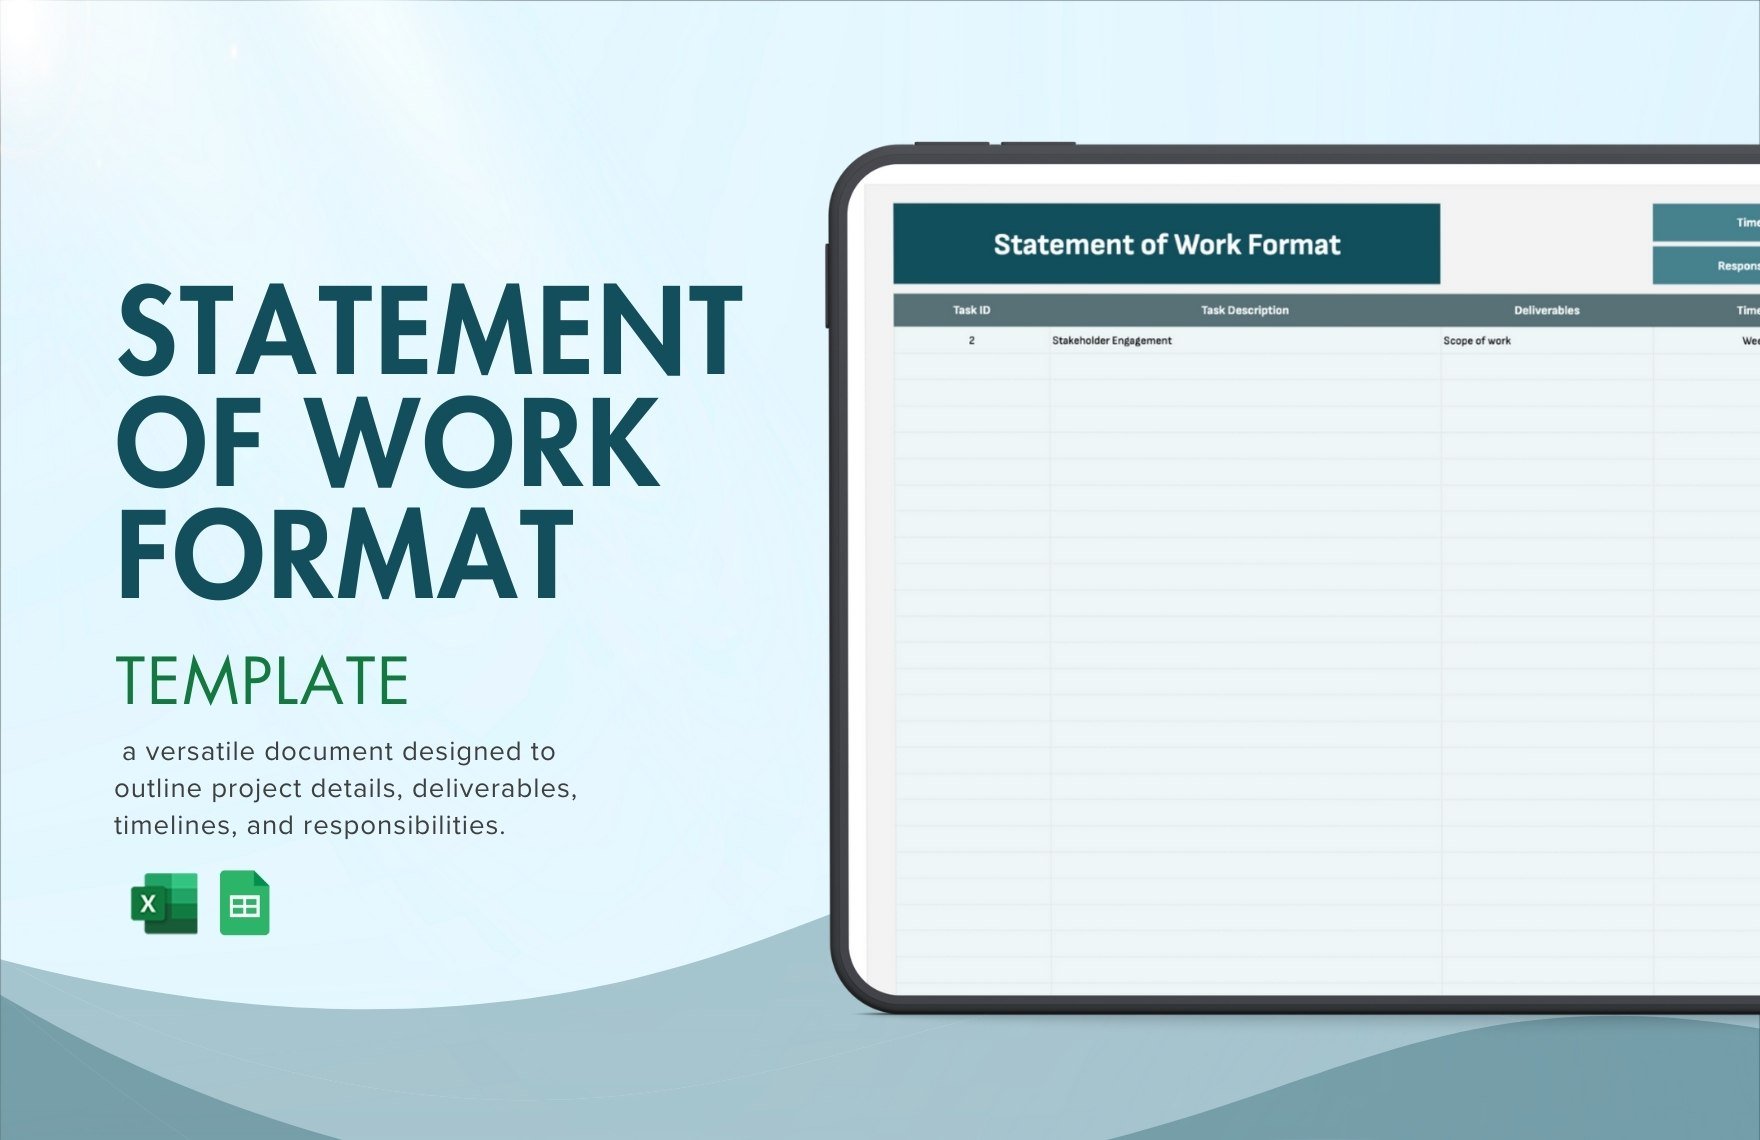 Statement of Work Format Template